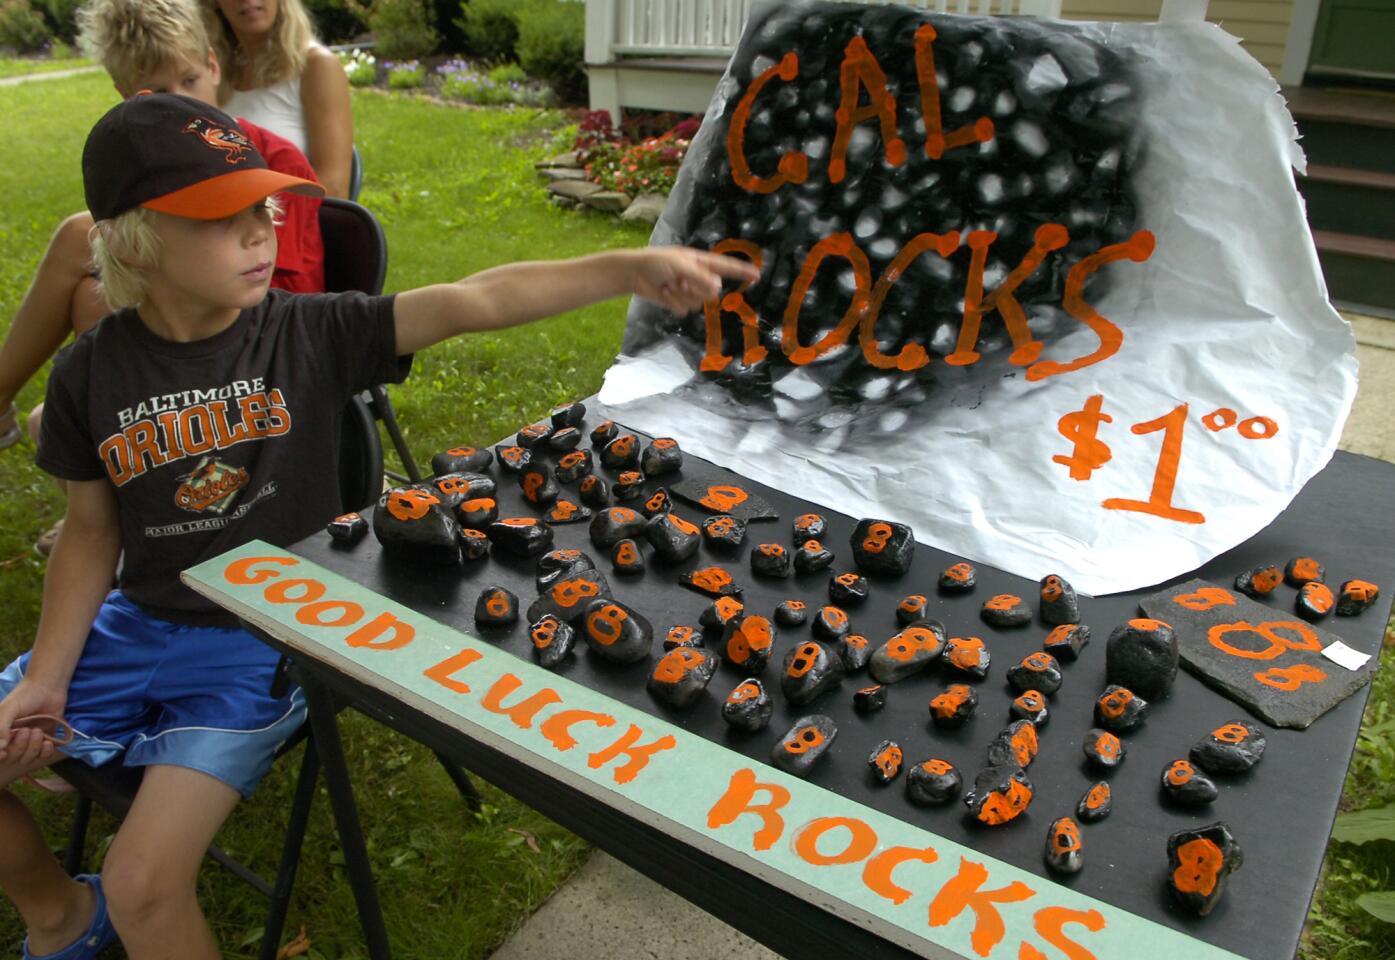 Ted Mebust, 7, of Cooperstown selling his handmade "Cal Rocks" on the route heading to where Cal Ripken Jr. and Tony Gwynn were to be inducted into the Baseball Hall of Fame.